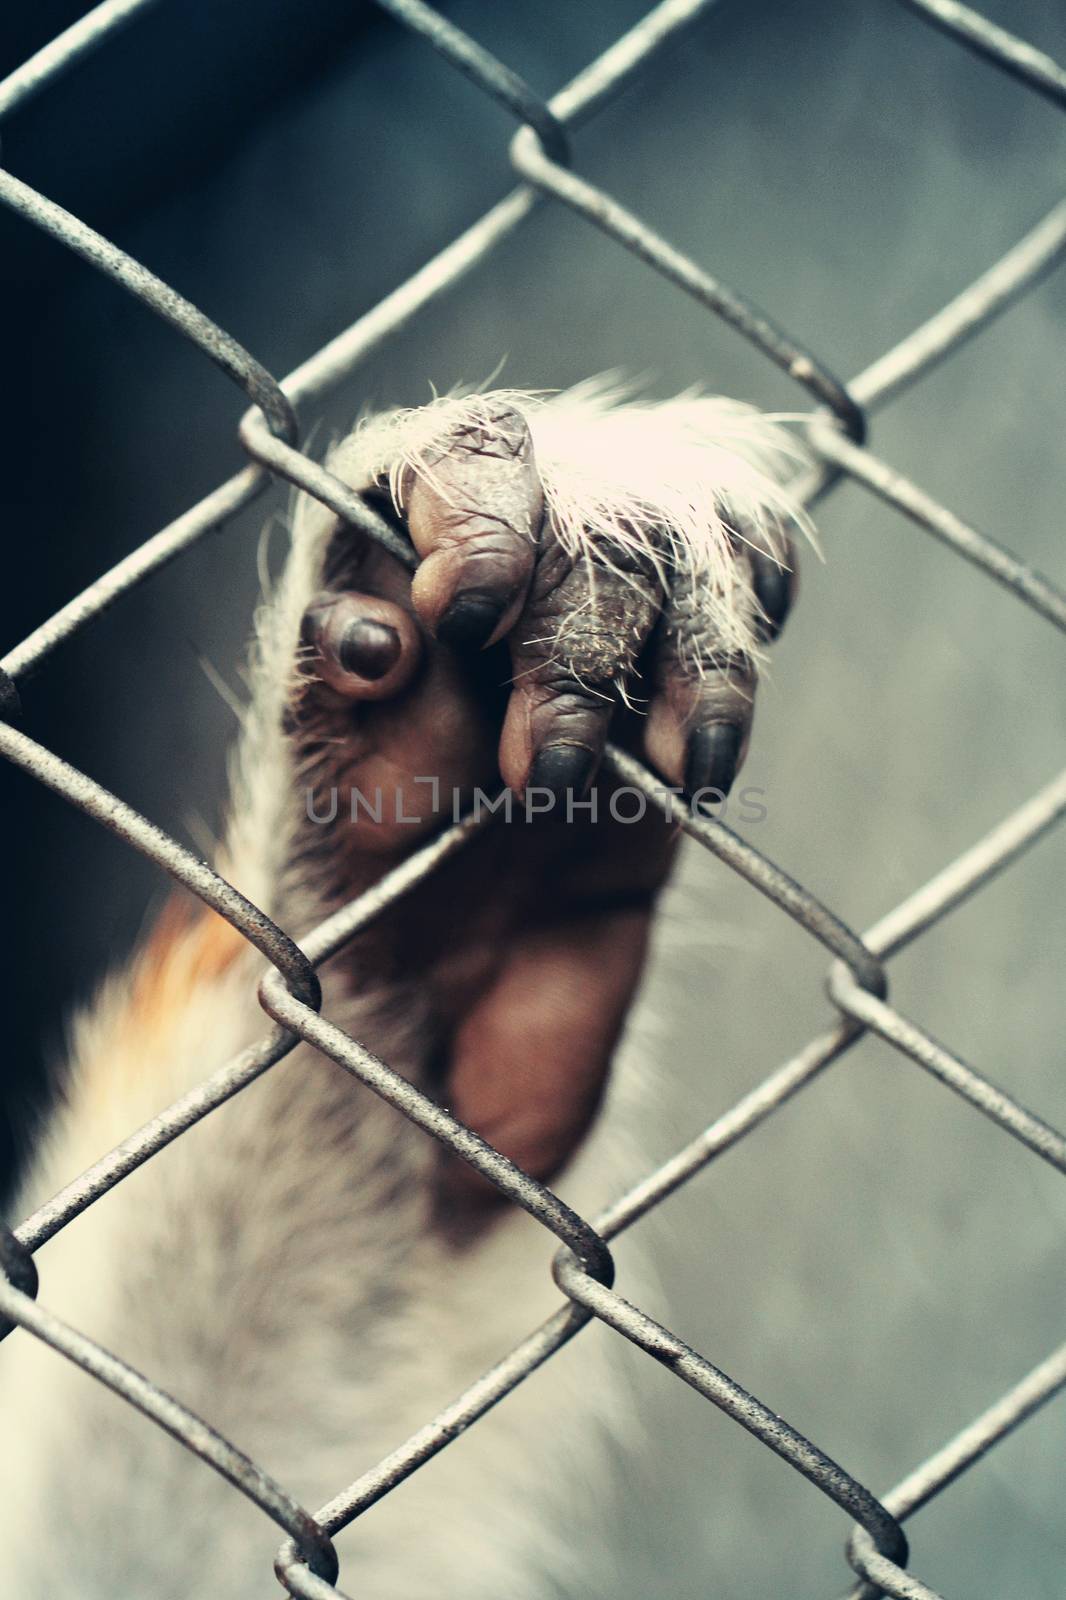 Paw of monkey holding cage at zoo